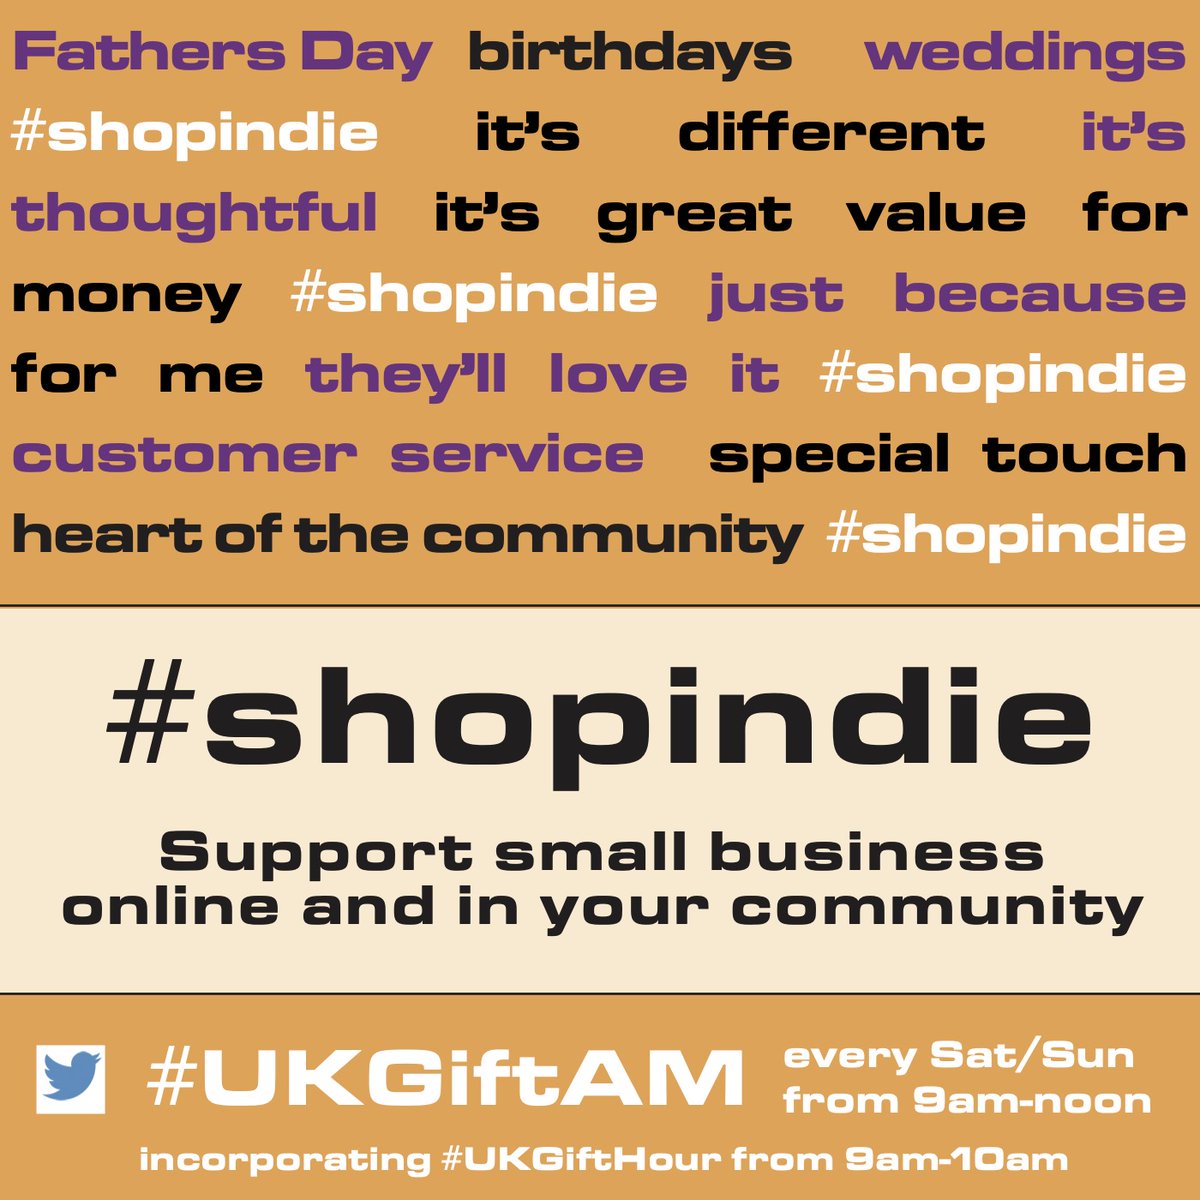 You are now entering #UKGIftAM! More time after #UKGiftHour to appreciate and catch up with UK indie & creative #giftideas and chat. Excuse us if we're not able to continue full hosting but please keep spreading the #SaturdayMorning #shopindie inspiration regardless ✊